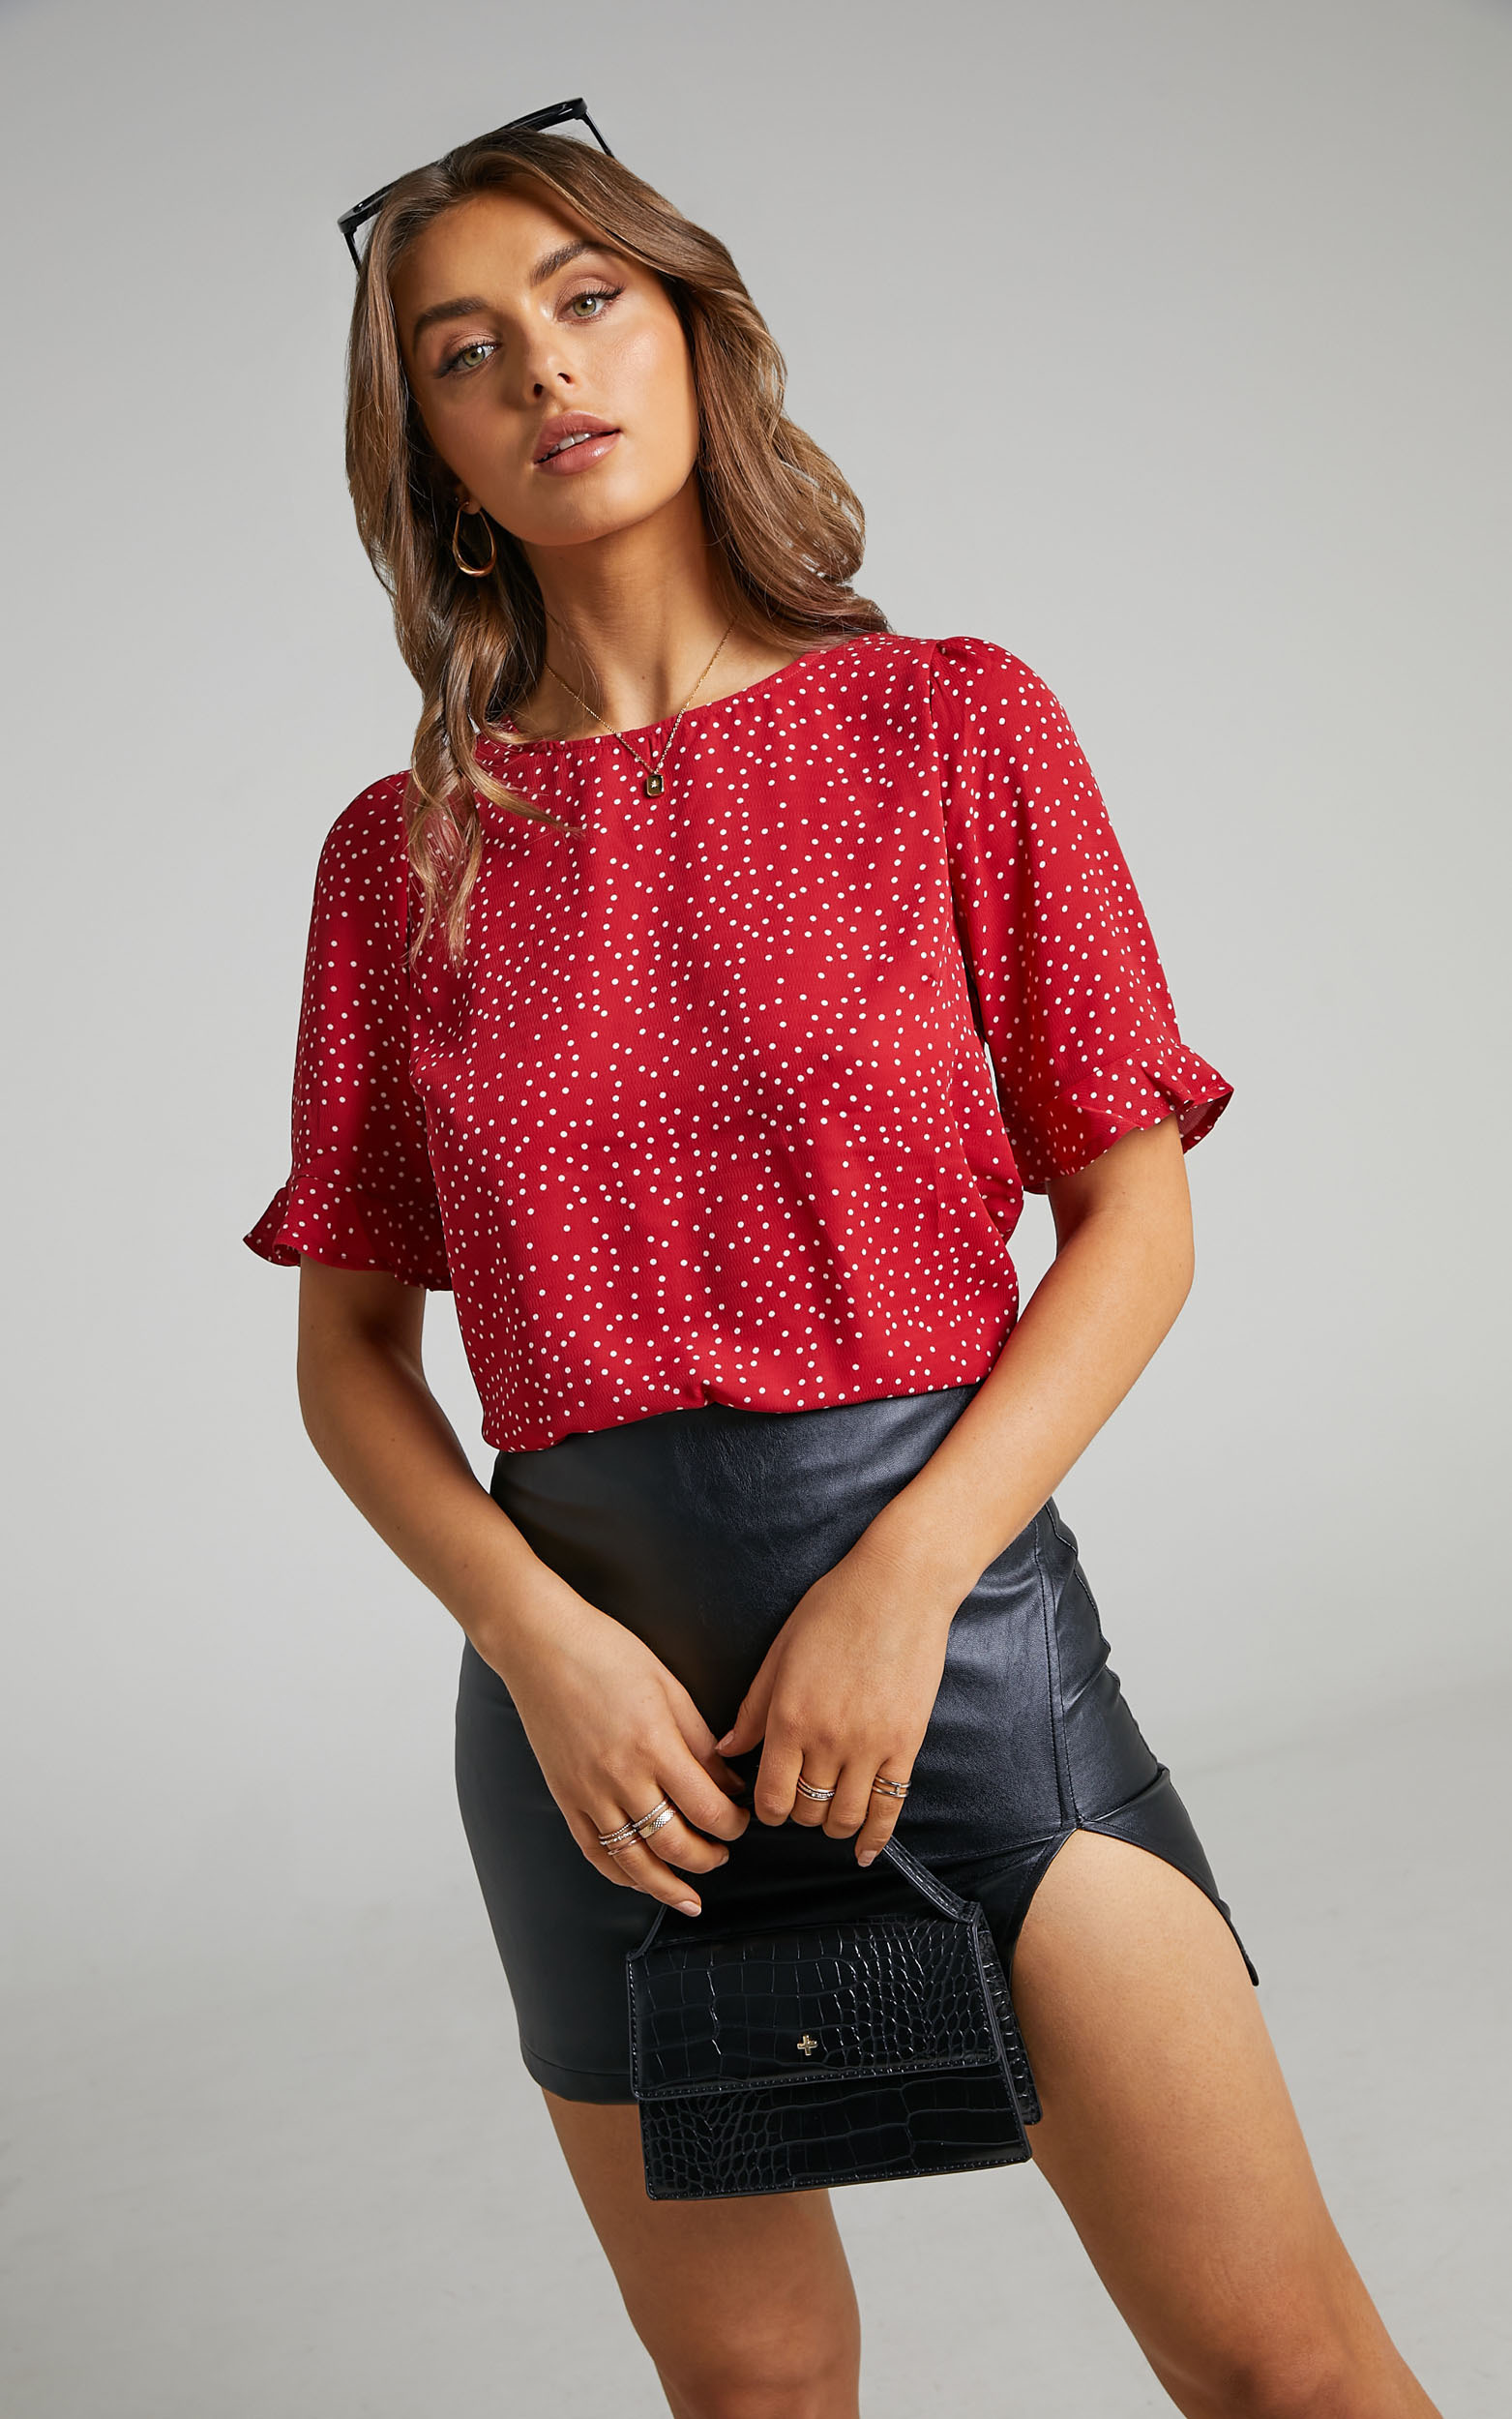 Eleanor Top - Short Sleeve Top in Red Spot - 06, RED2, hi-res image number null